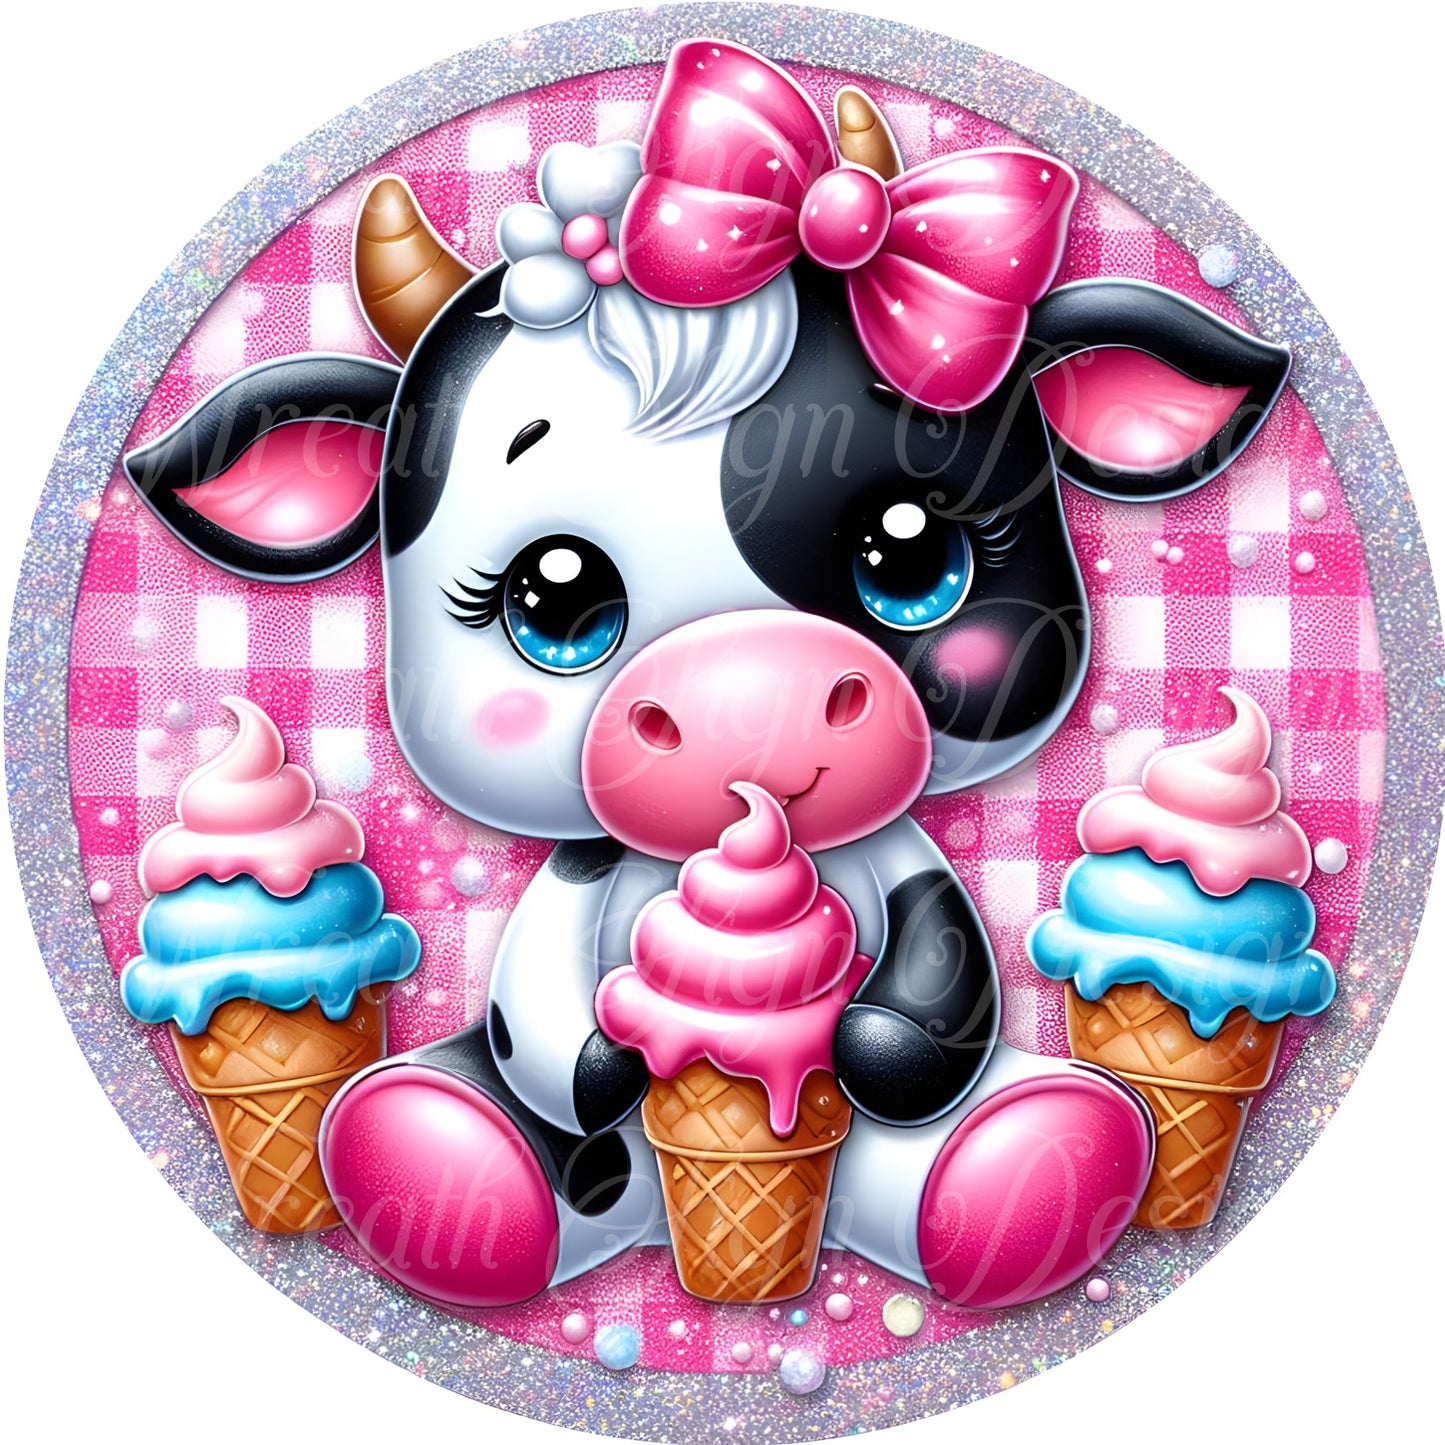 Summertime, Black and white cow eating Ice Cream wreath sign, Ice cream sign, Wreath center, Wreath attachment